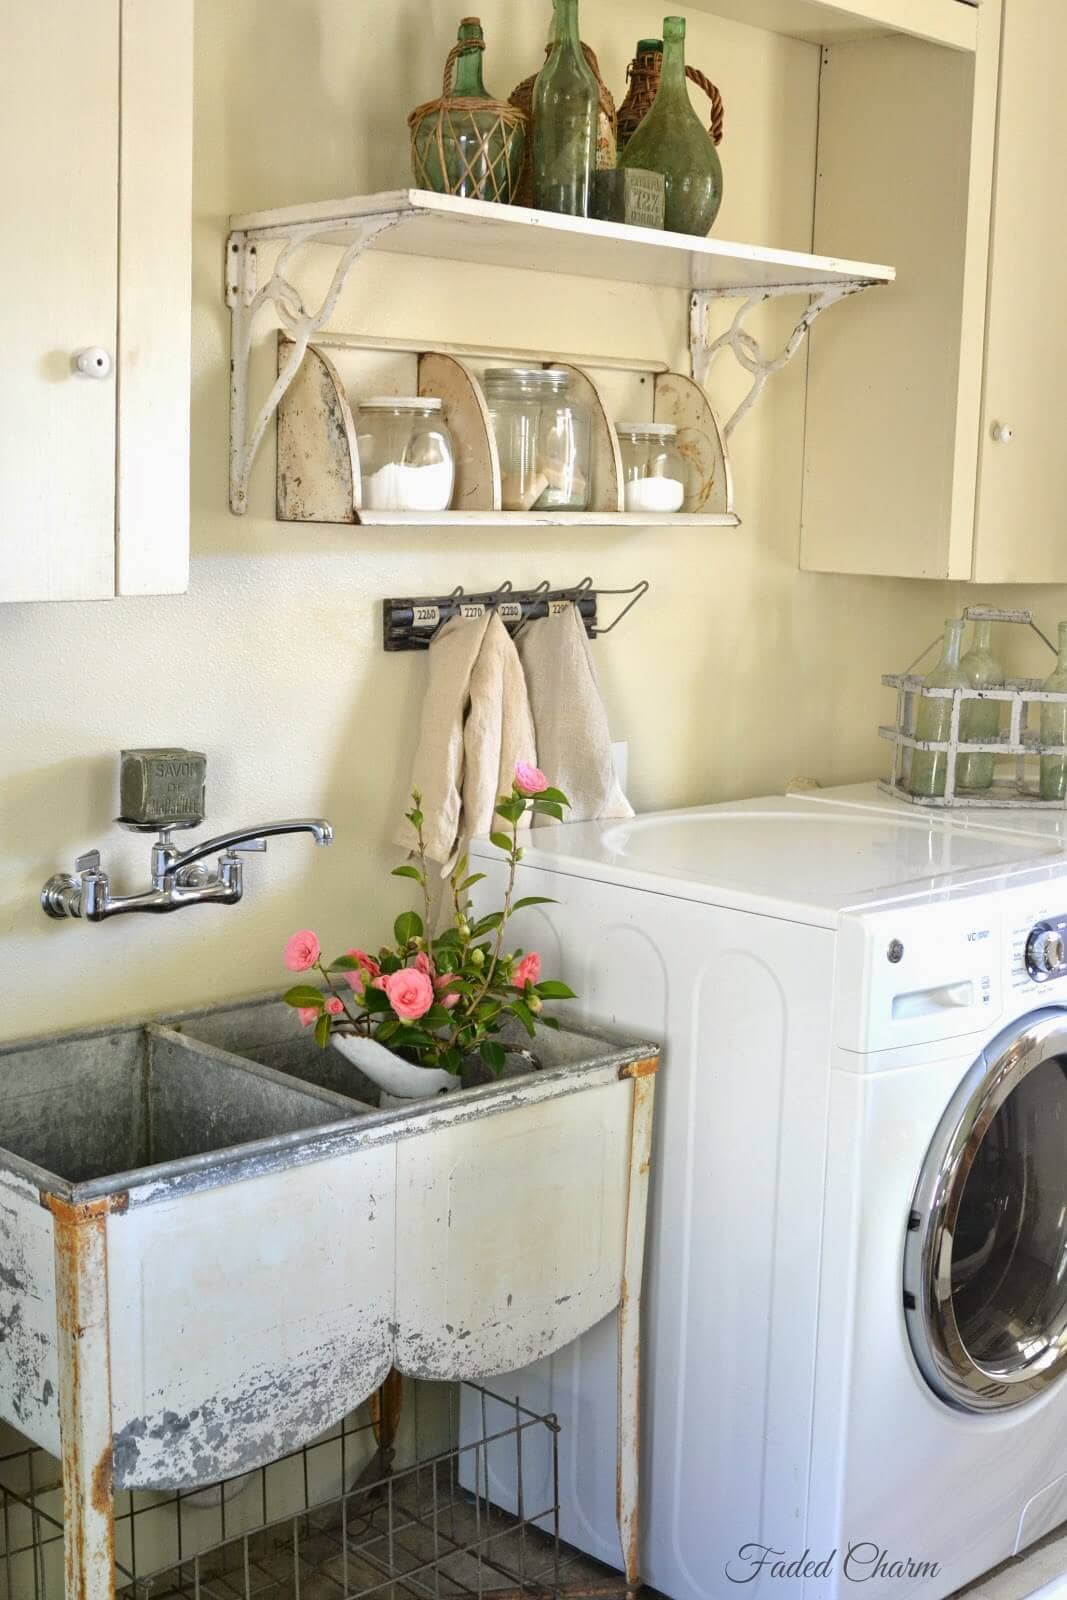 29 ideas to decorate your laundry room in vintage style - 83